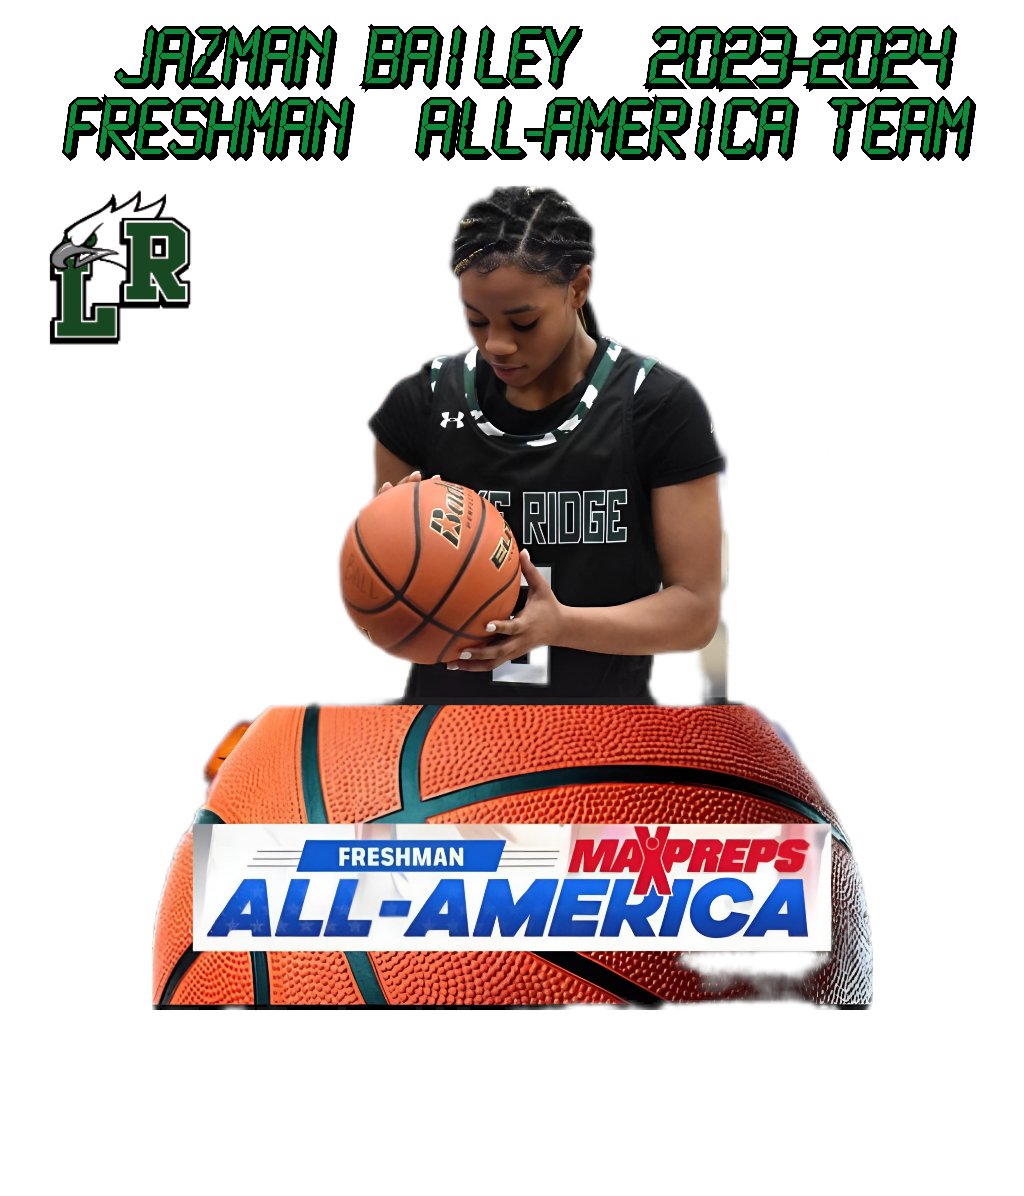 Thanking GOD and staying humble!  Congratulations to all!  Thanking GOD for the ups and the downs! @LakeRidgeGBB @EarlRooks4 @bballjkey @ProSkillsGBB